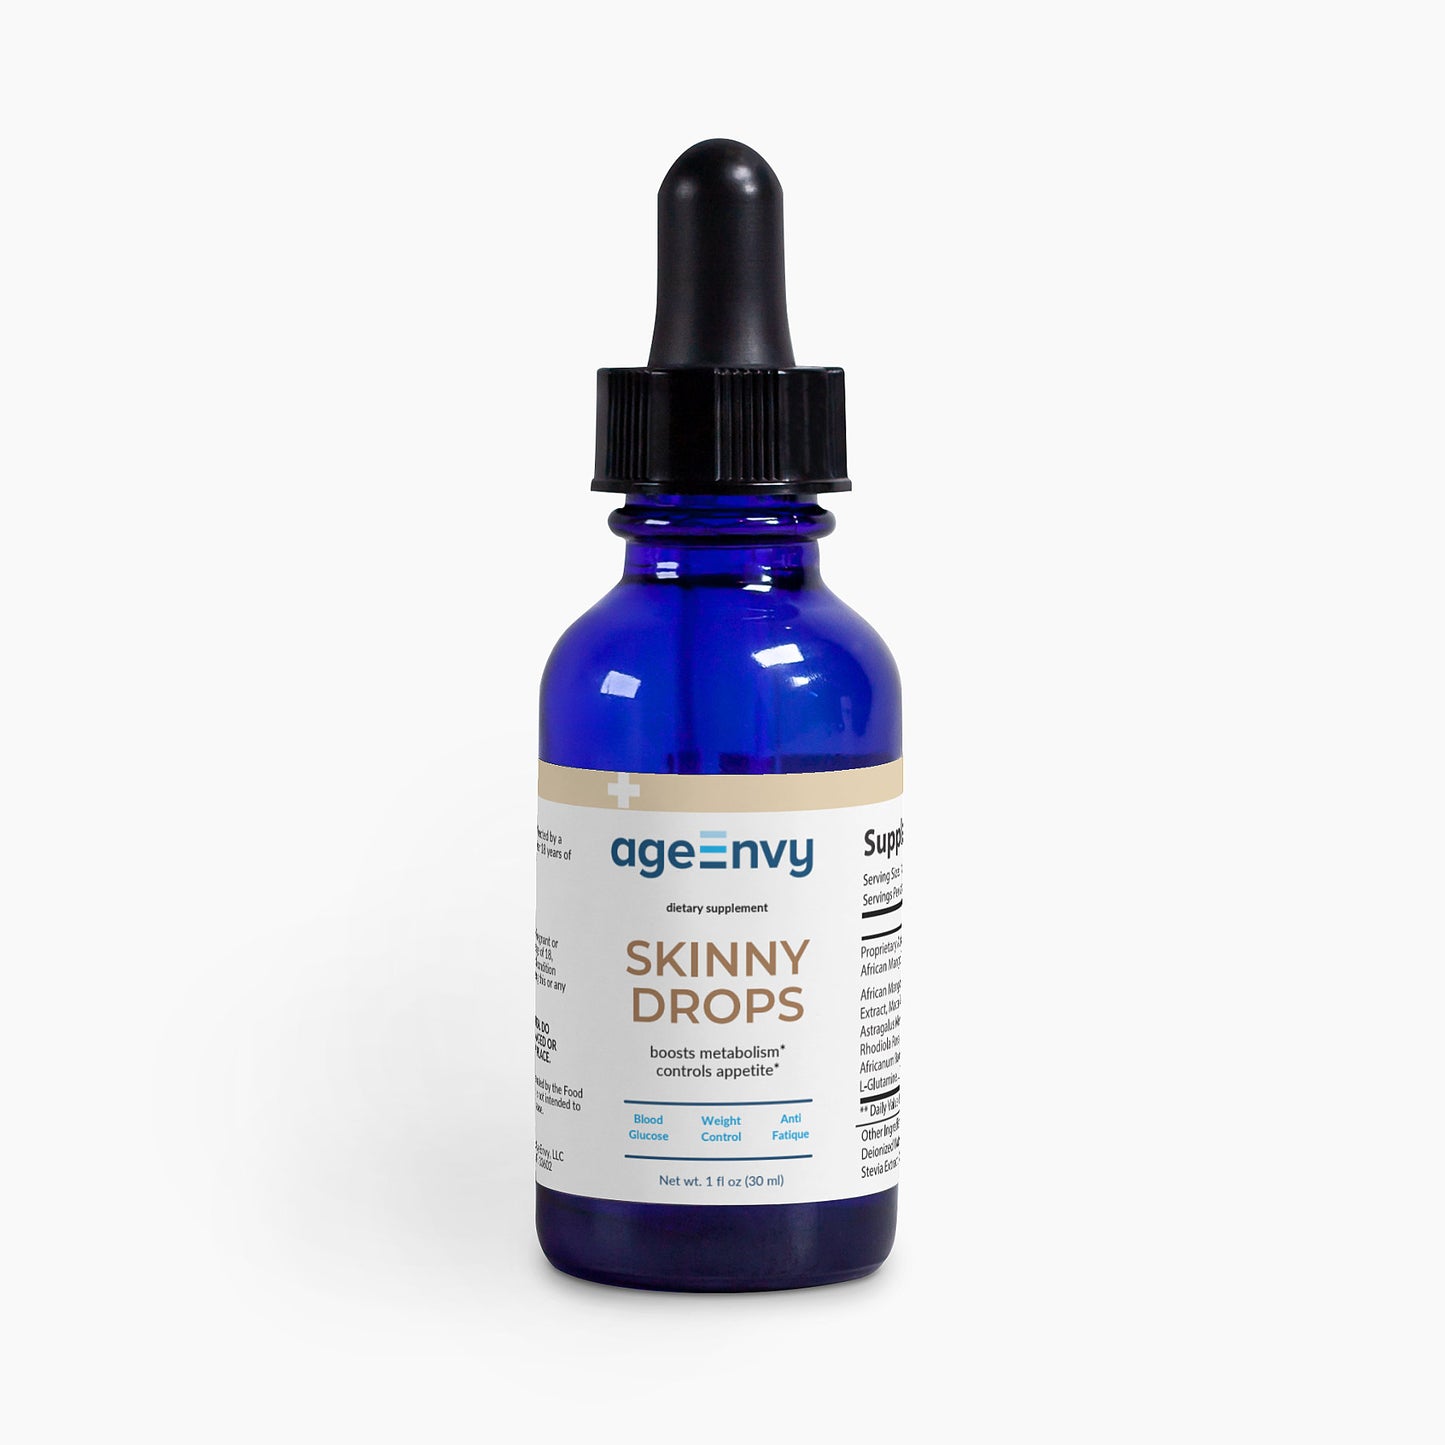 Skinny Drops - Weight Loss, Metabolism Booster